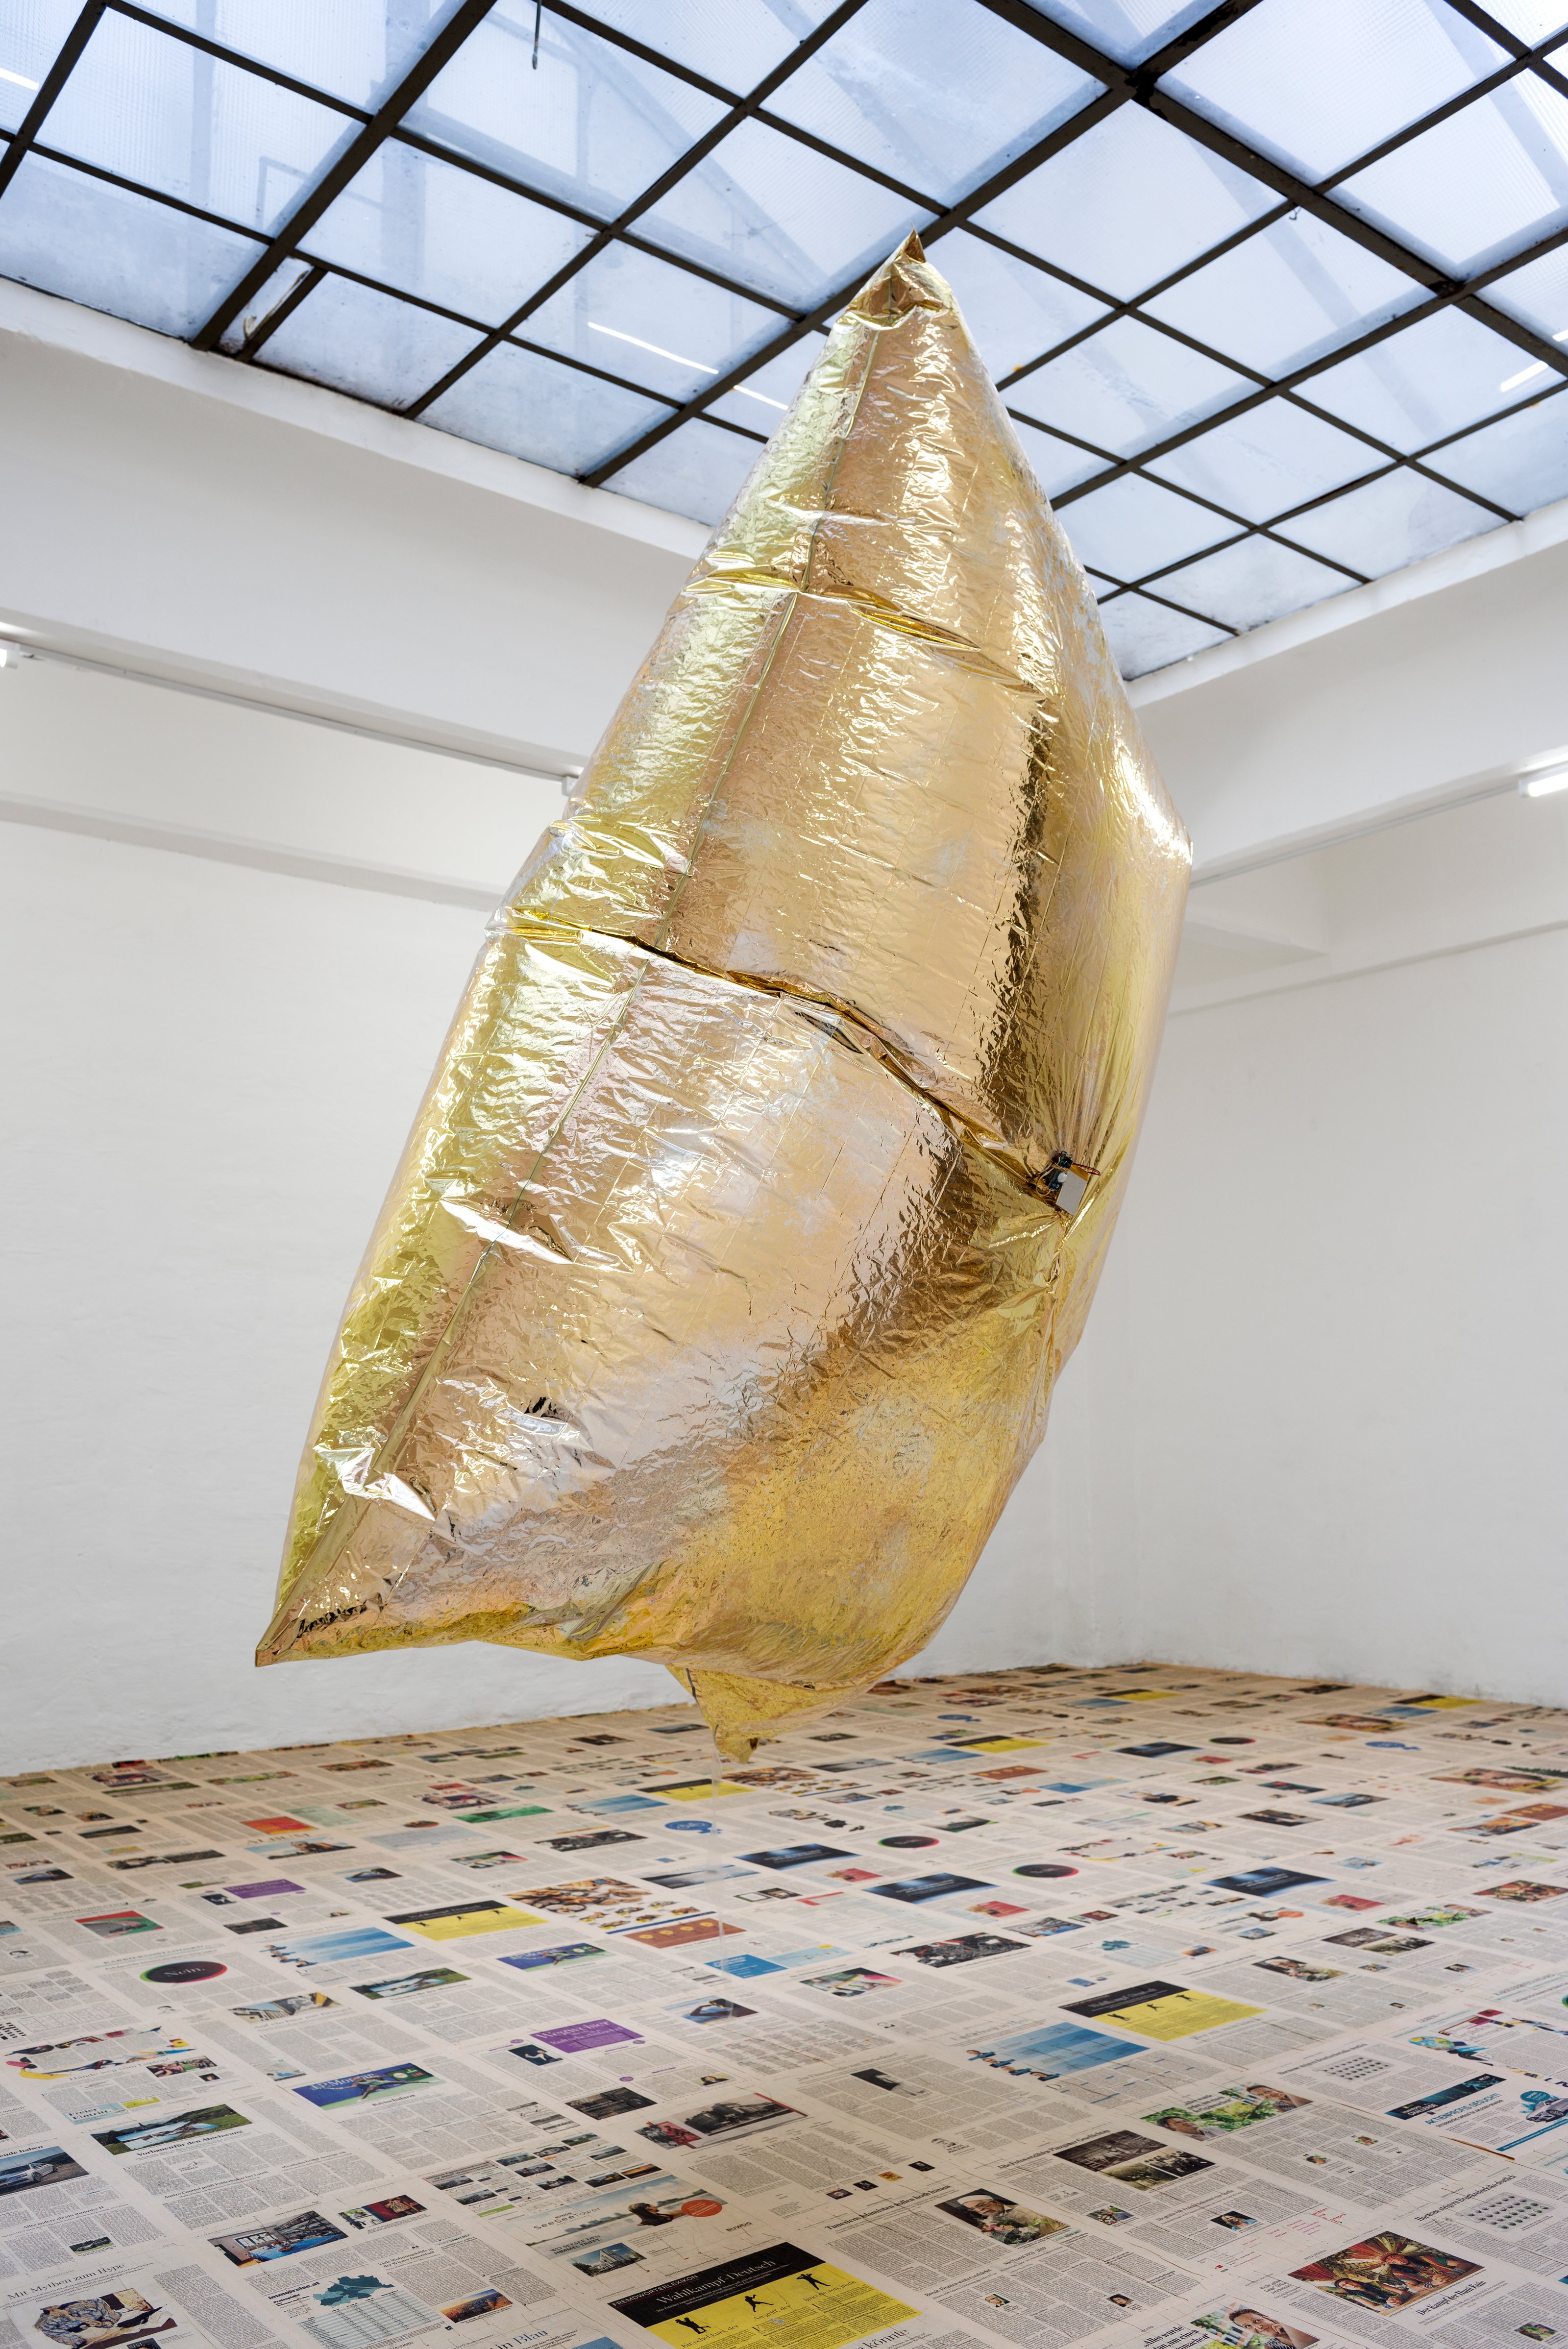 A huge, air-filled, golden, pillow-like balloon is suspended from the ceiling of an art gallery with a glass ceiling, white walls, and a floor covered with newspaper leaves.